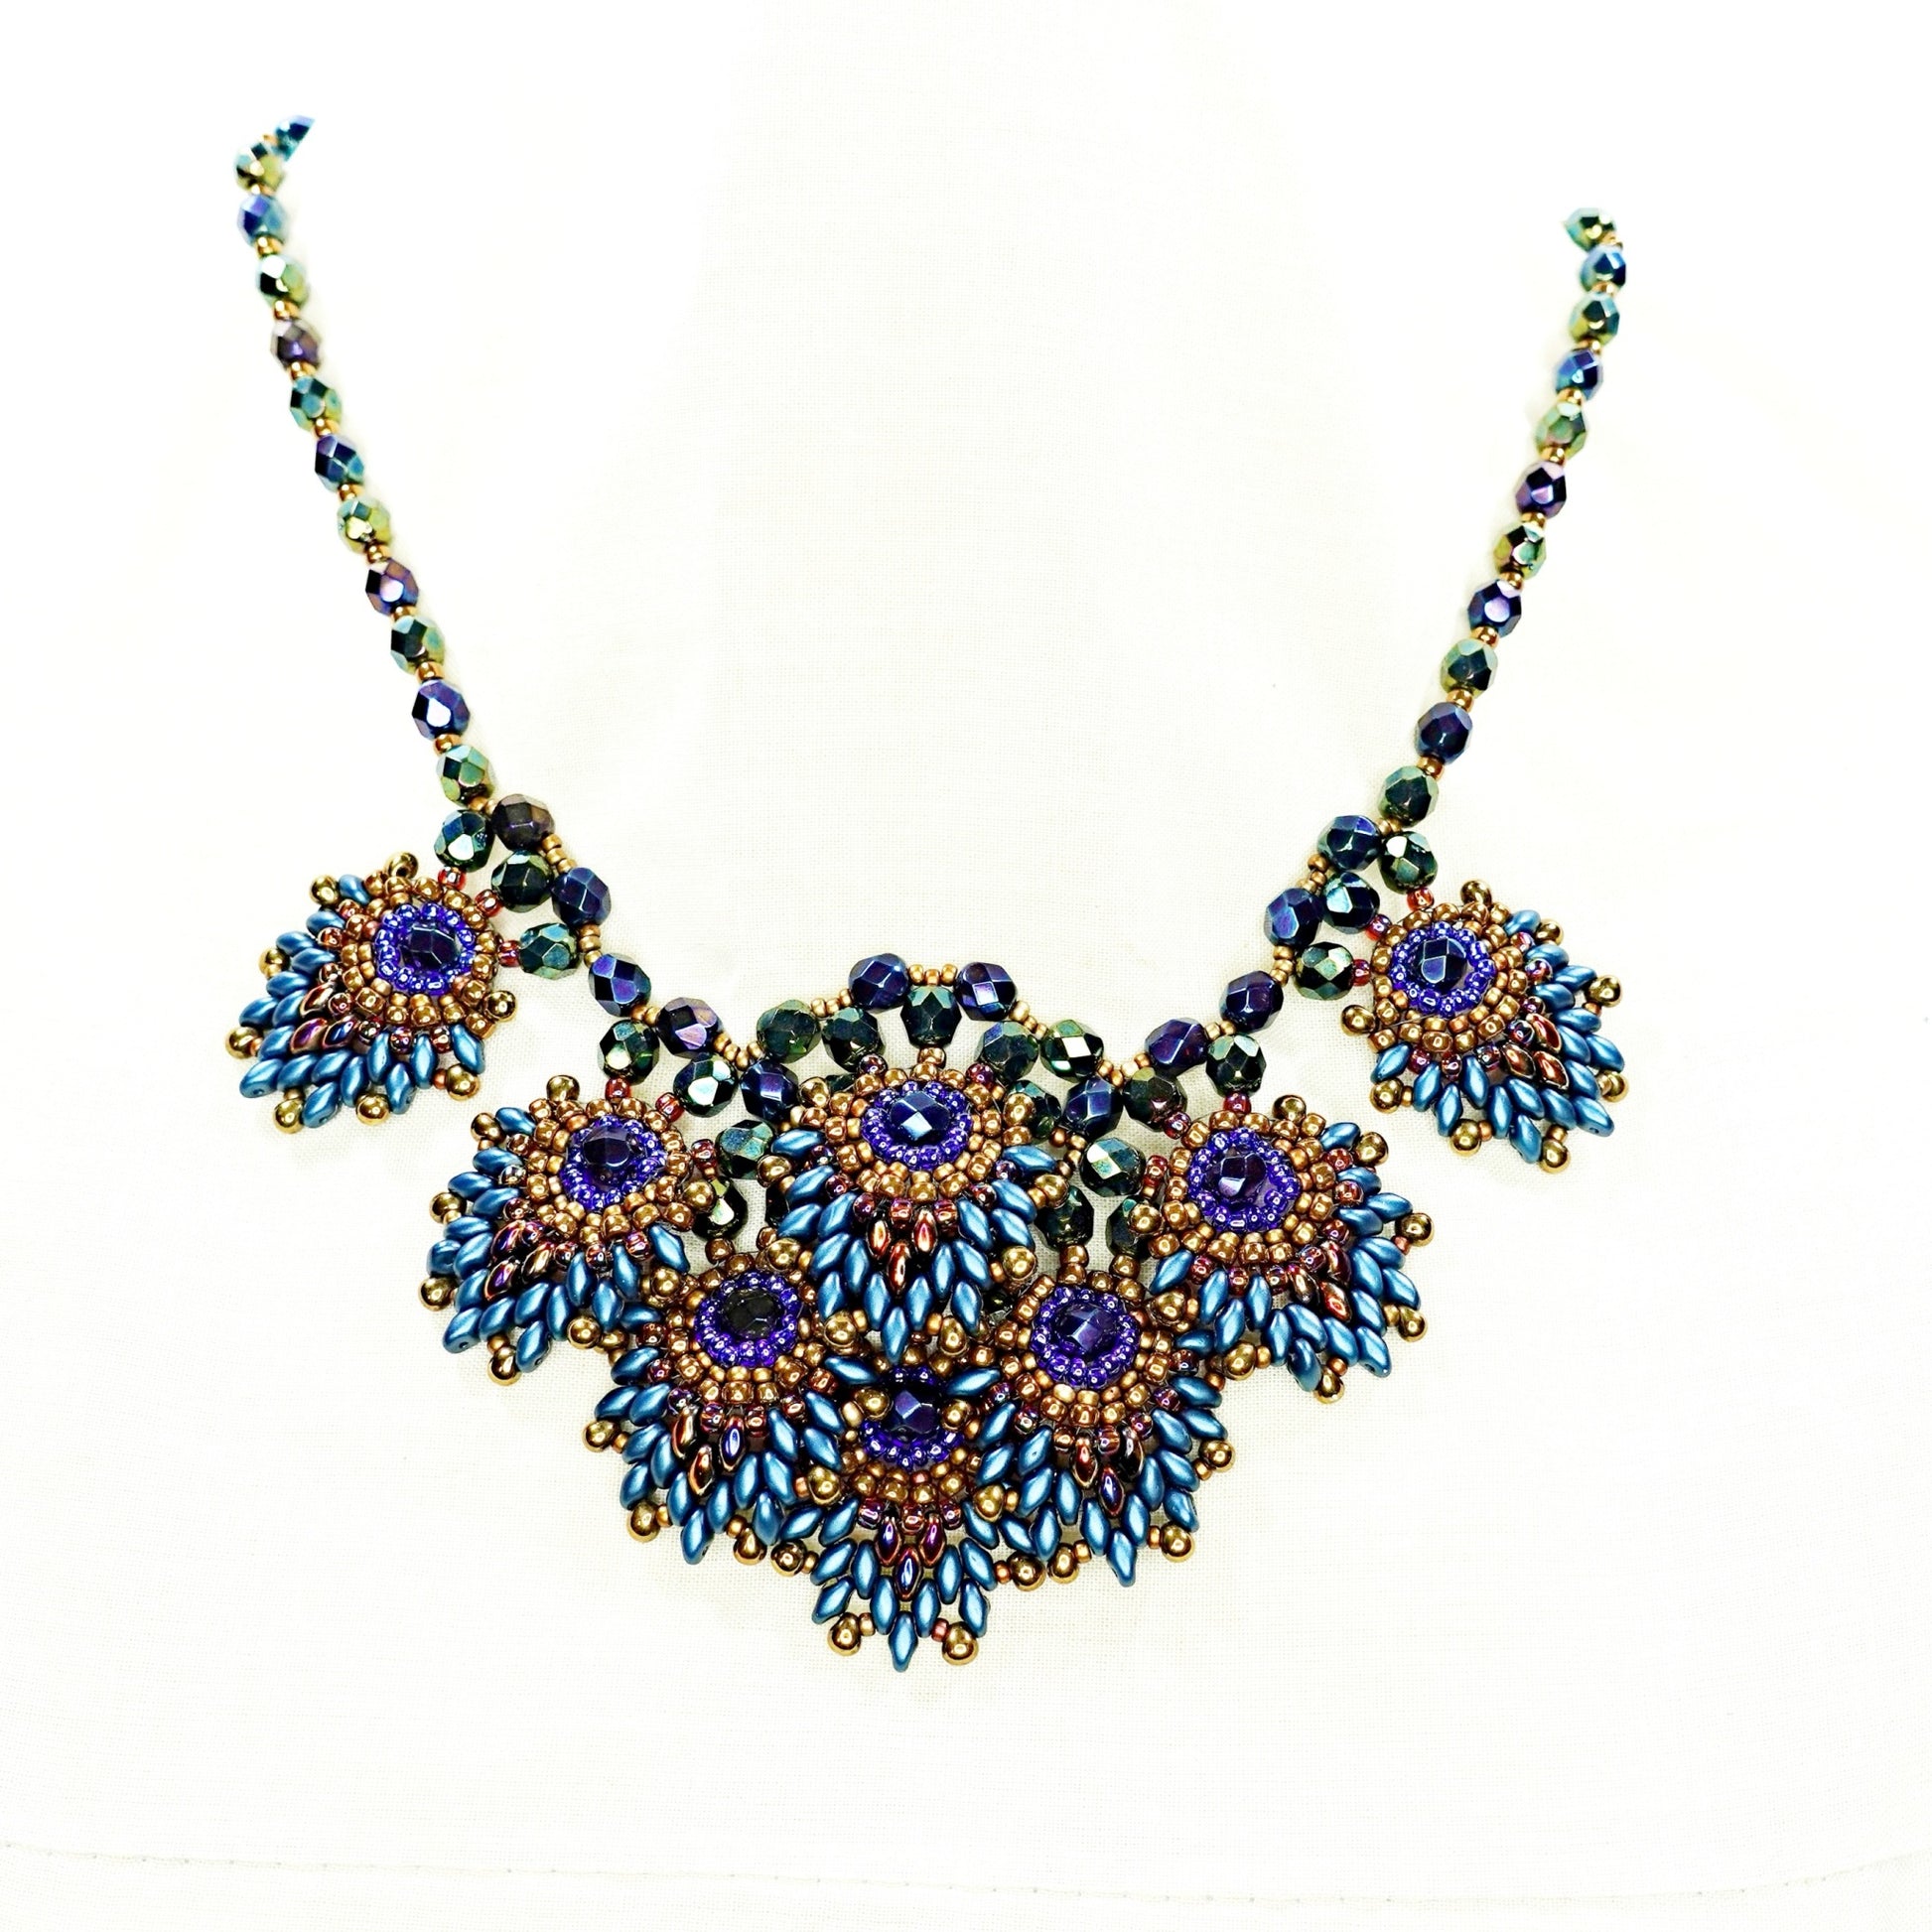 Peacock Feather Necklace Jewelry by Kendell Tubbs - Pixels